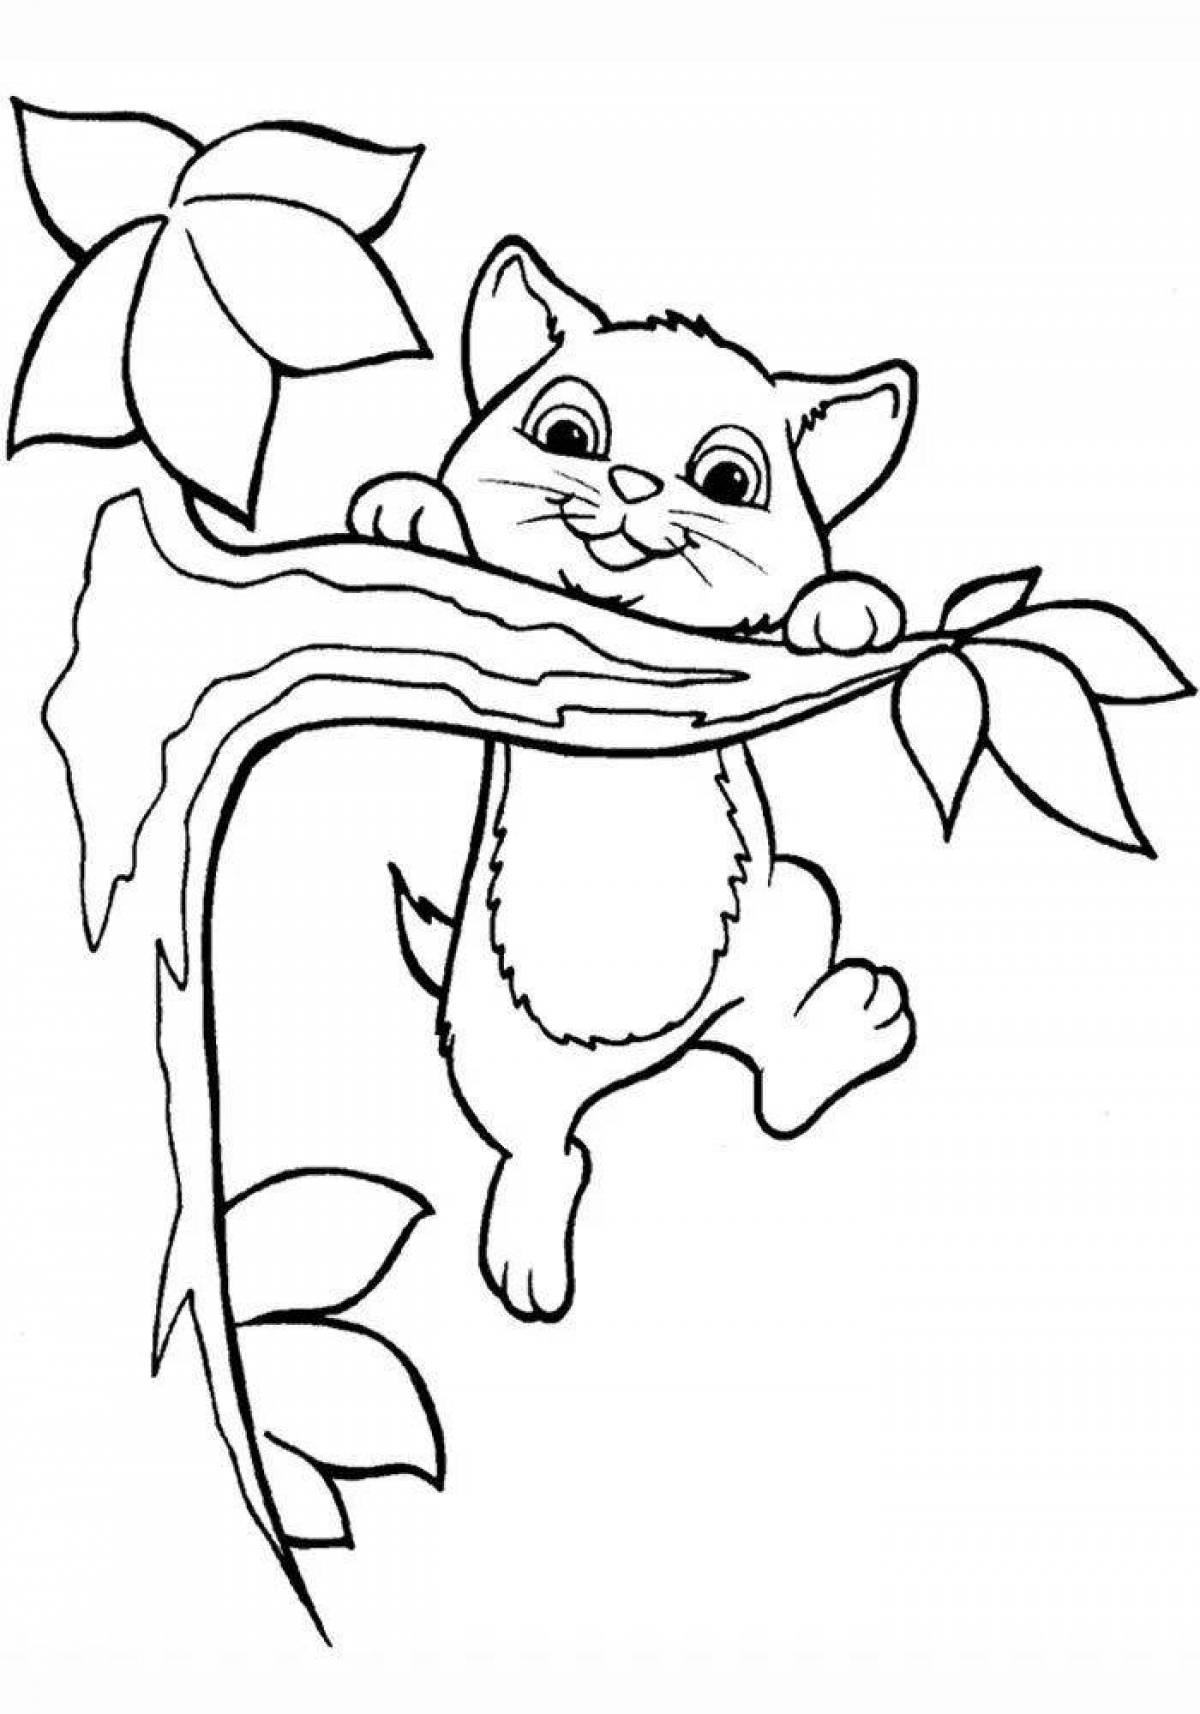 Live 7 year old kitten coloring book